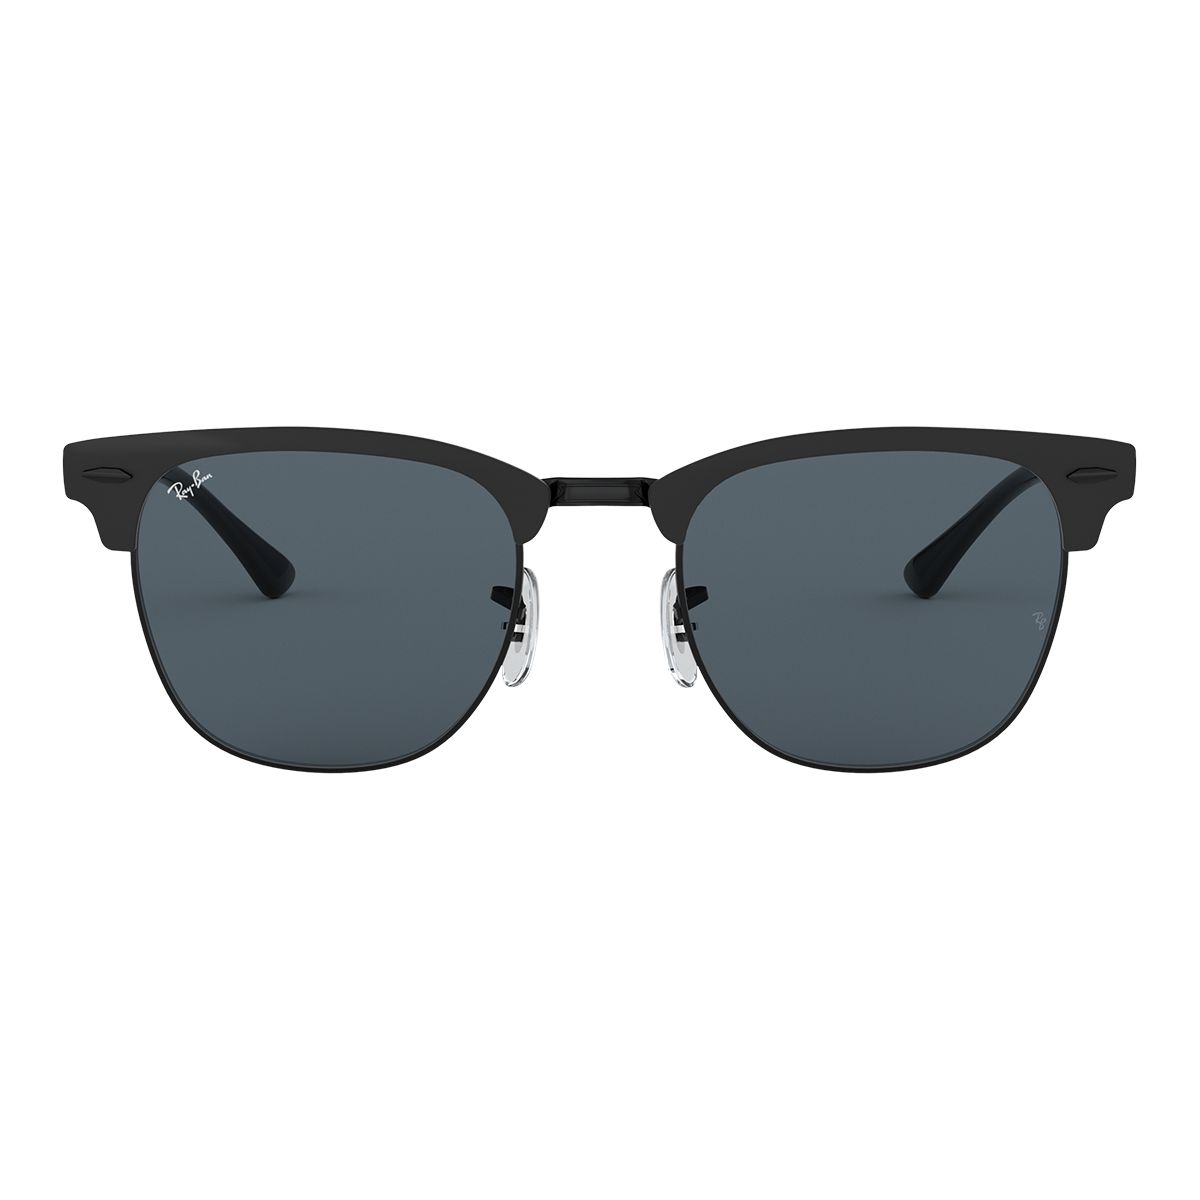 Image of Ray-Ban Clubmaster Metal Sunglasses